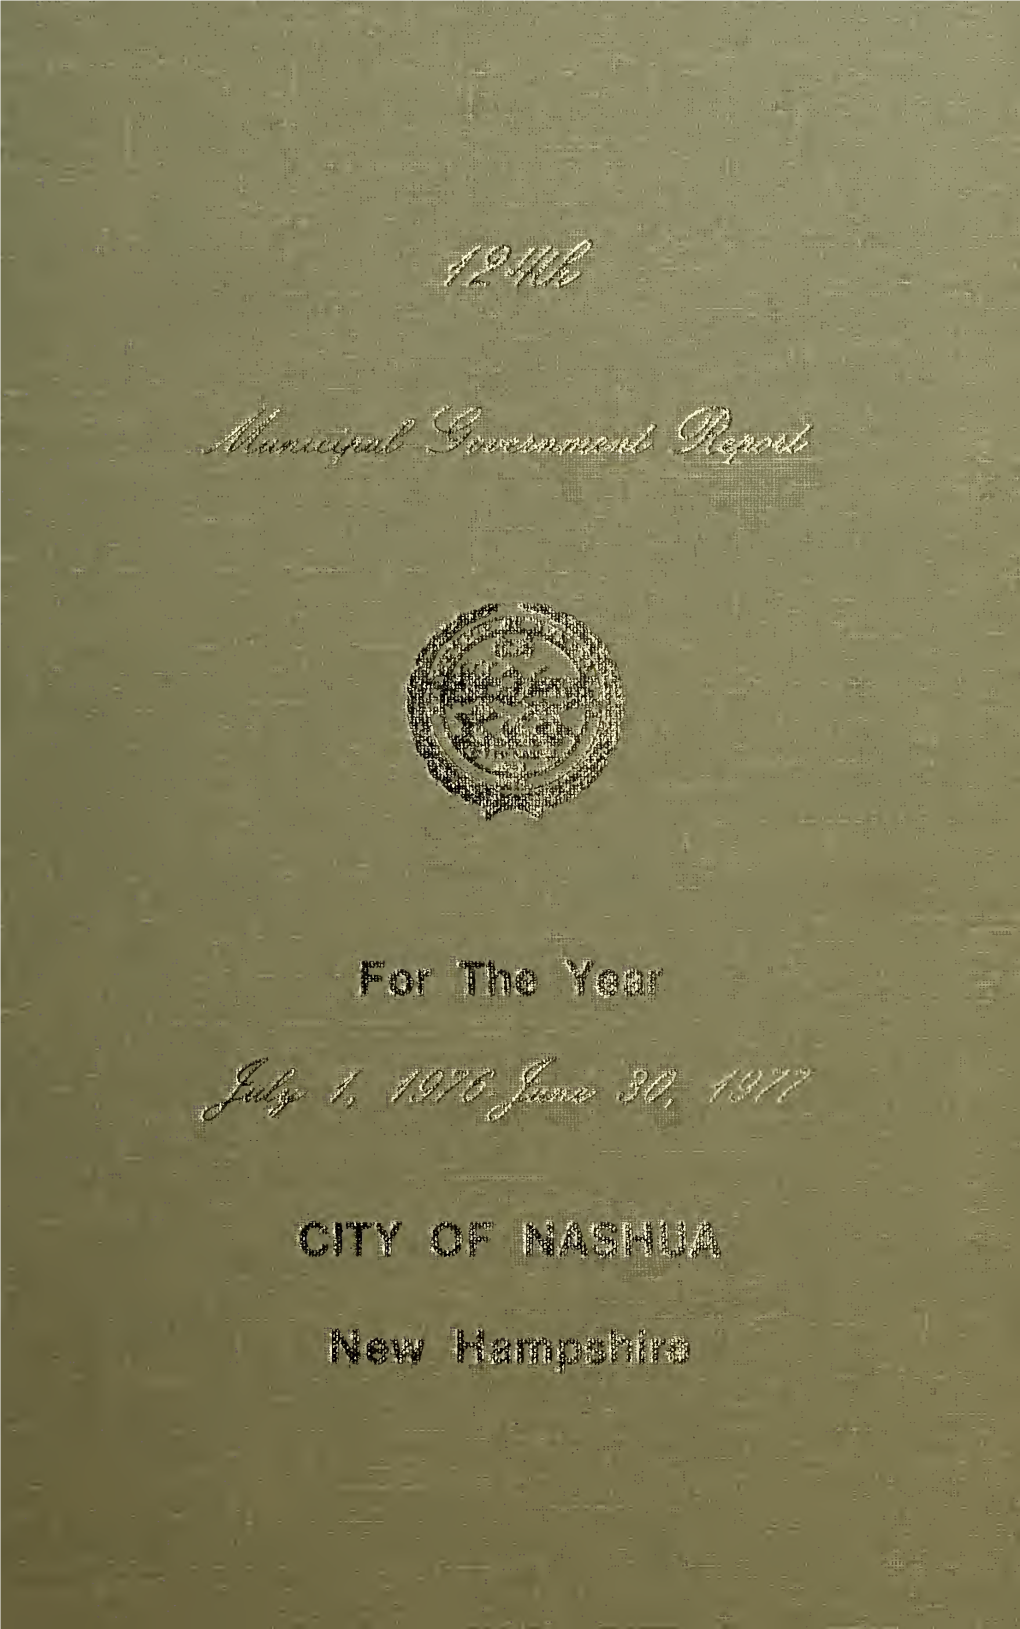 City of Nashua, N.H. 124Th Municipal Government Report of the Municipal